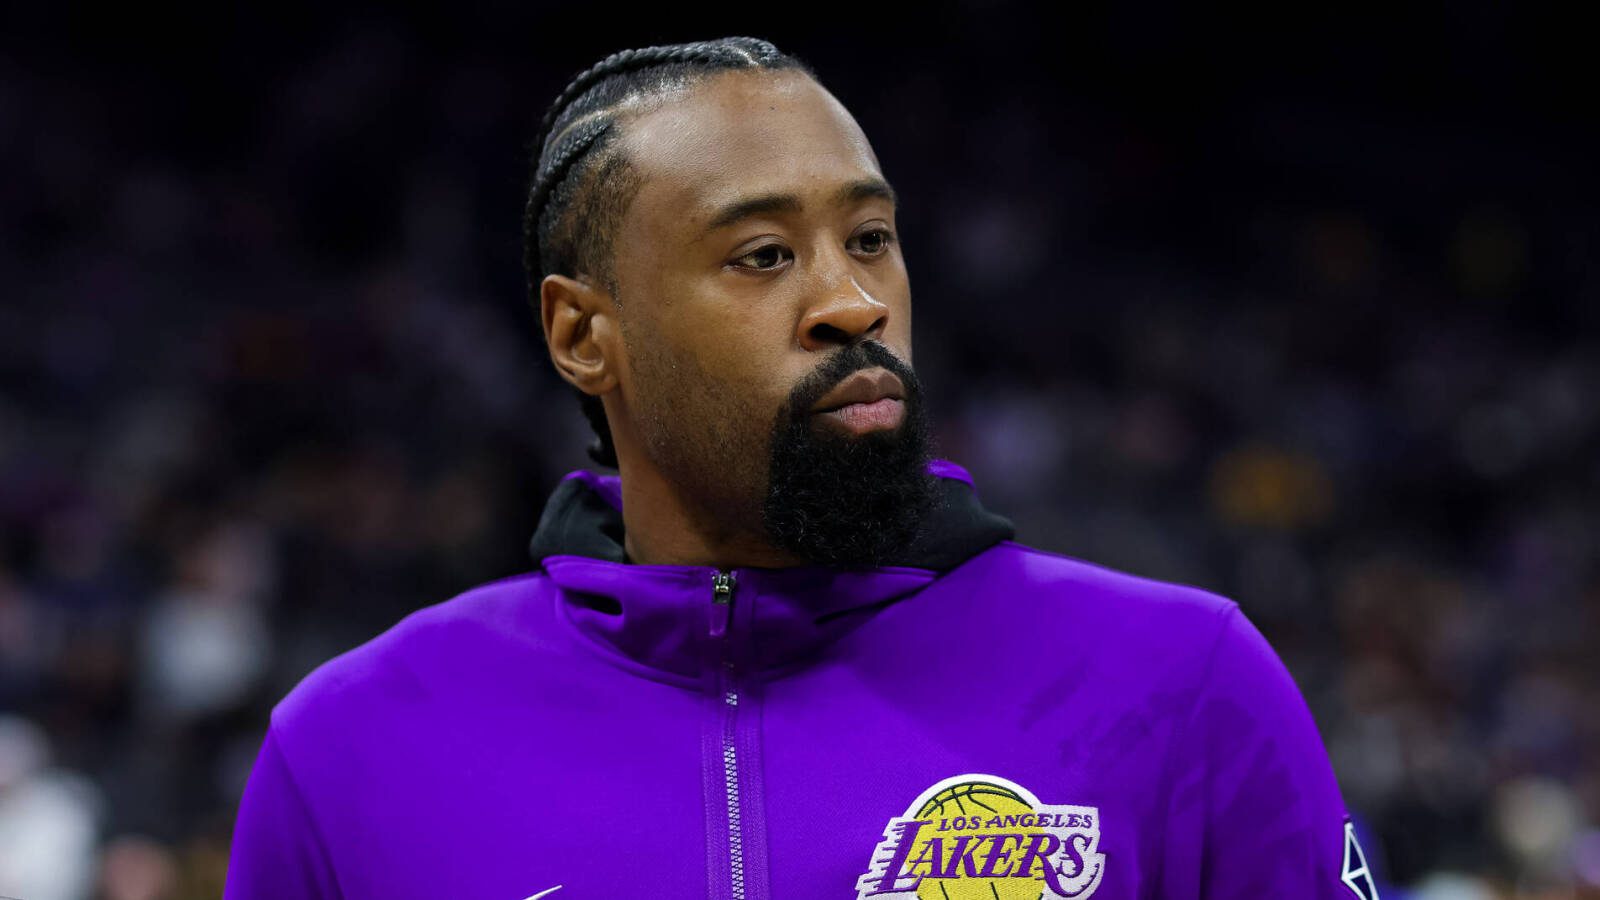 DeAndre Jordan was waived by the Lakers